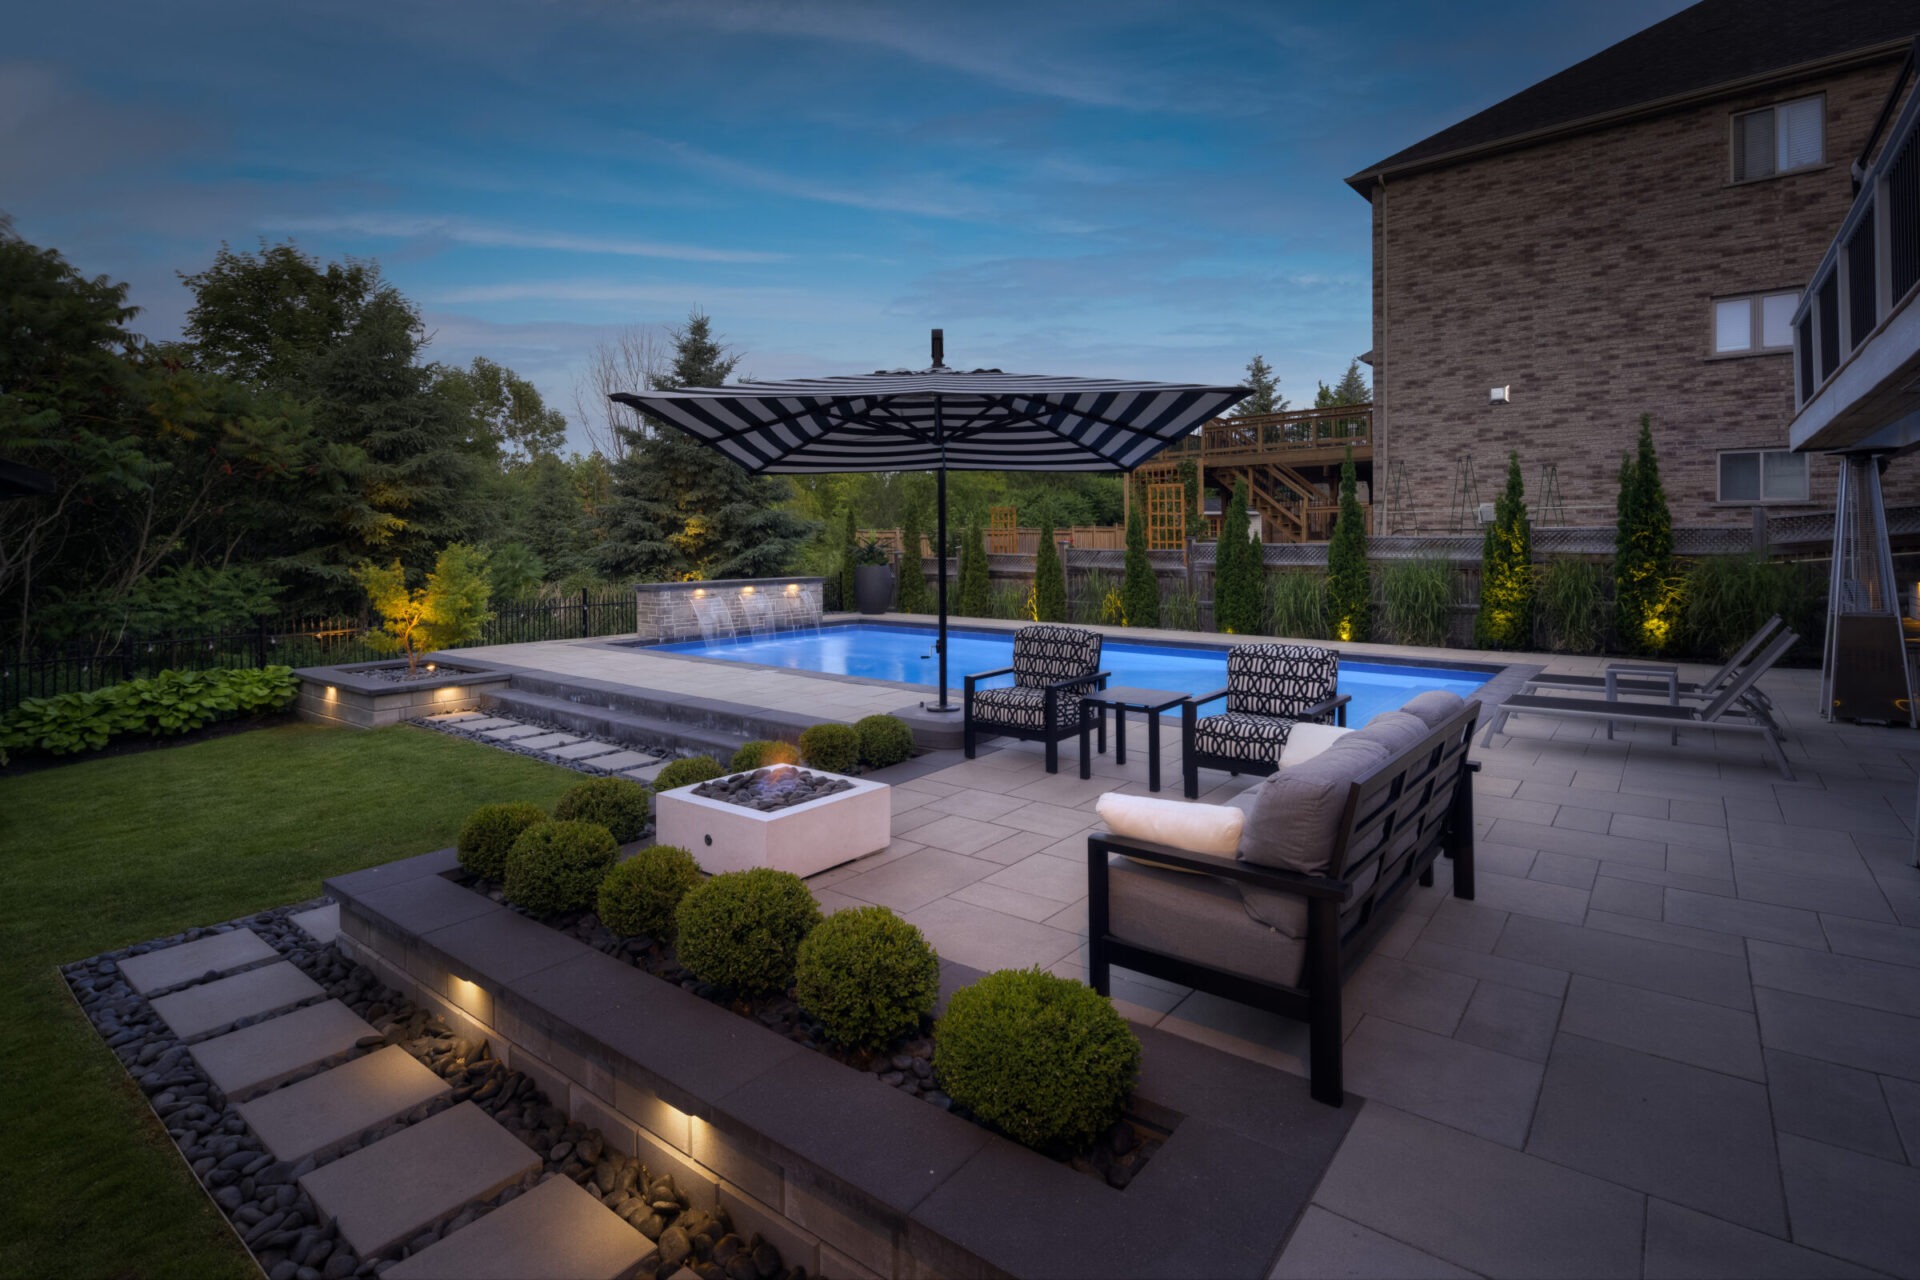 An elegant backyard at dusk featuring a swimming pool, patio with outdoor furniture, a pergola, manicured landscaping, and a brick house.